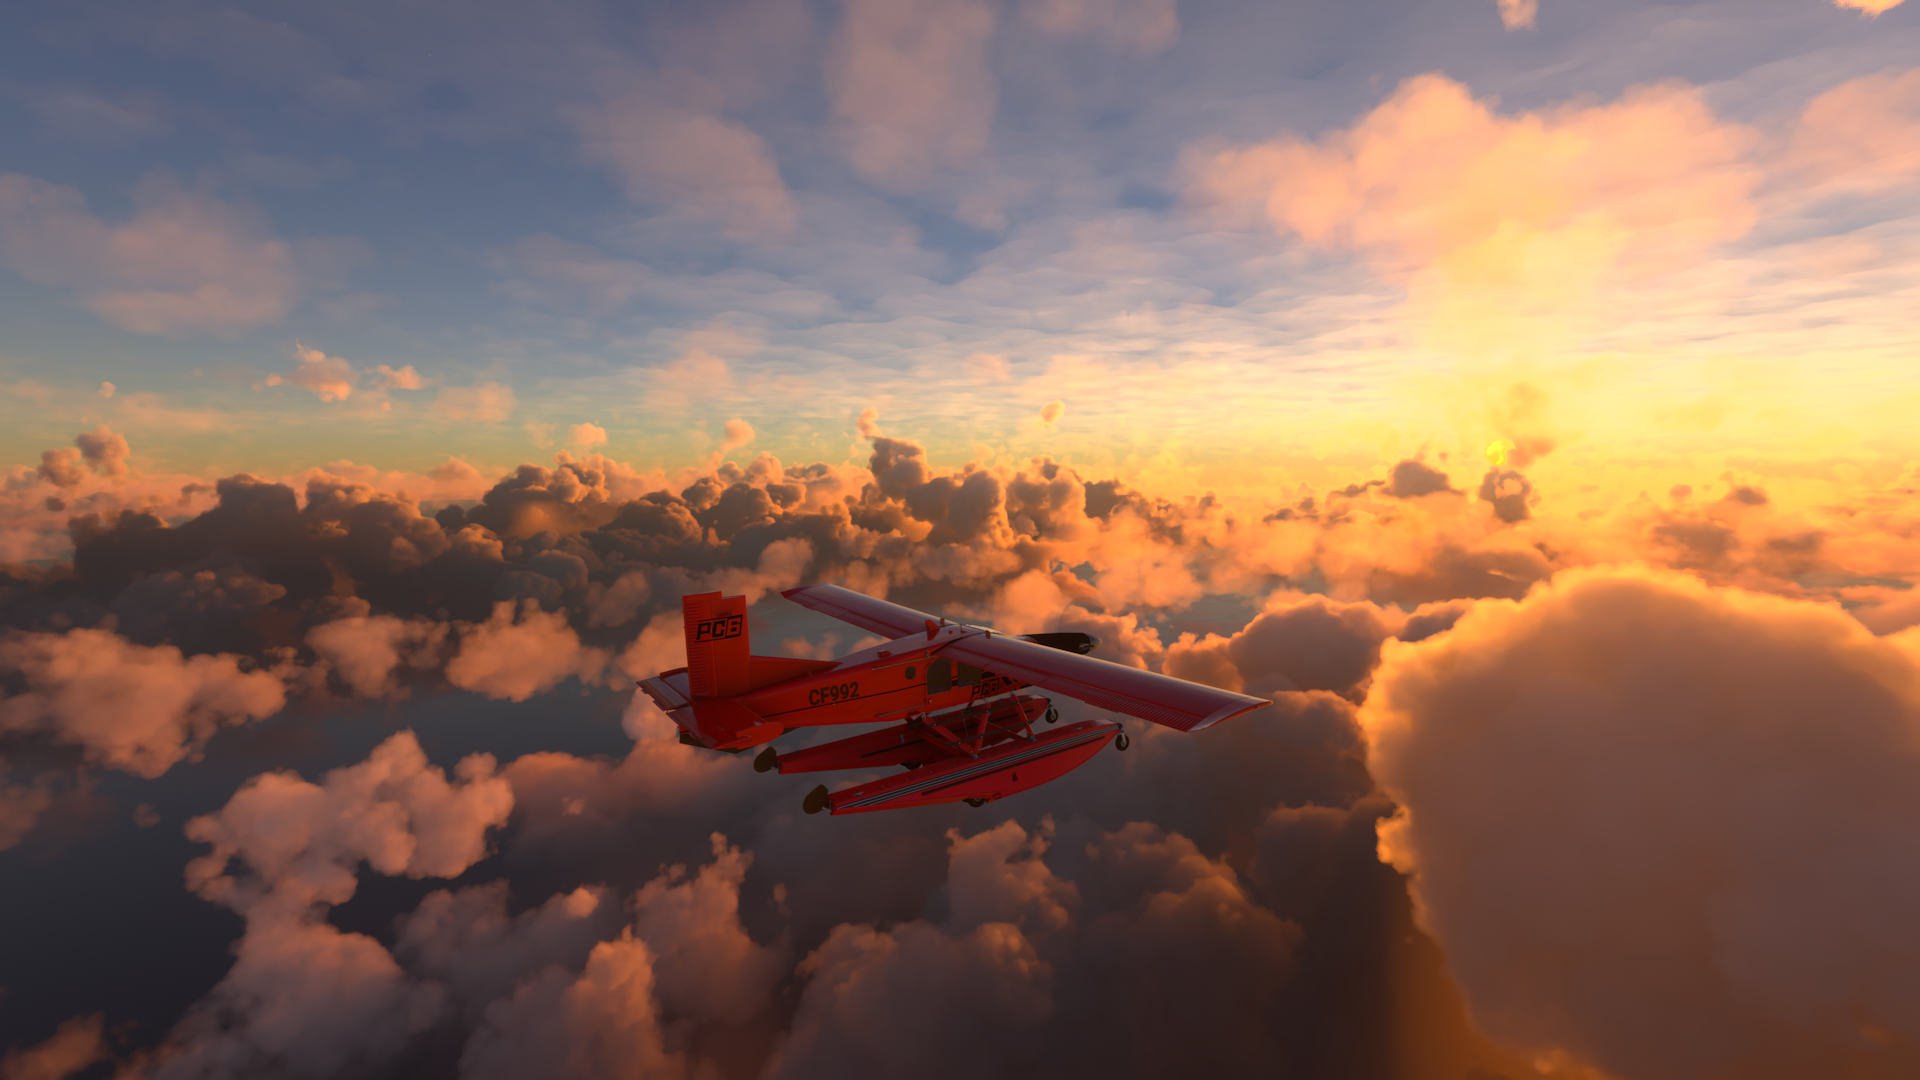 Pilatus PC-6 with floats over a sea of clouds in the sunset | Microsoft Flight Simulator